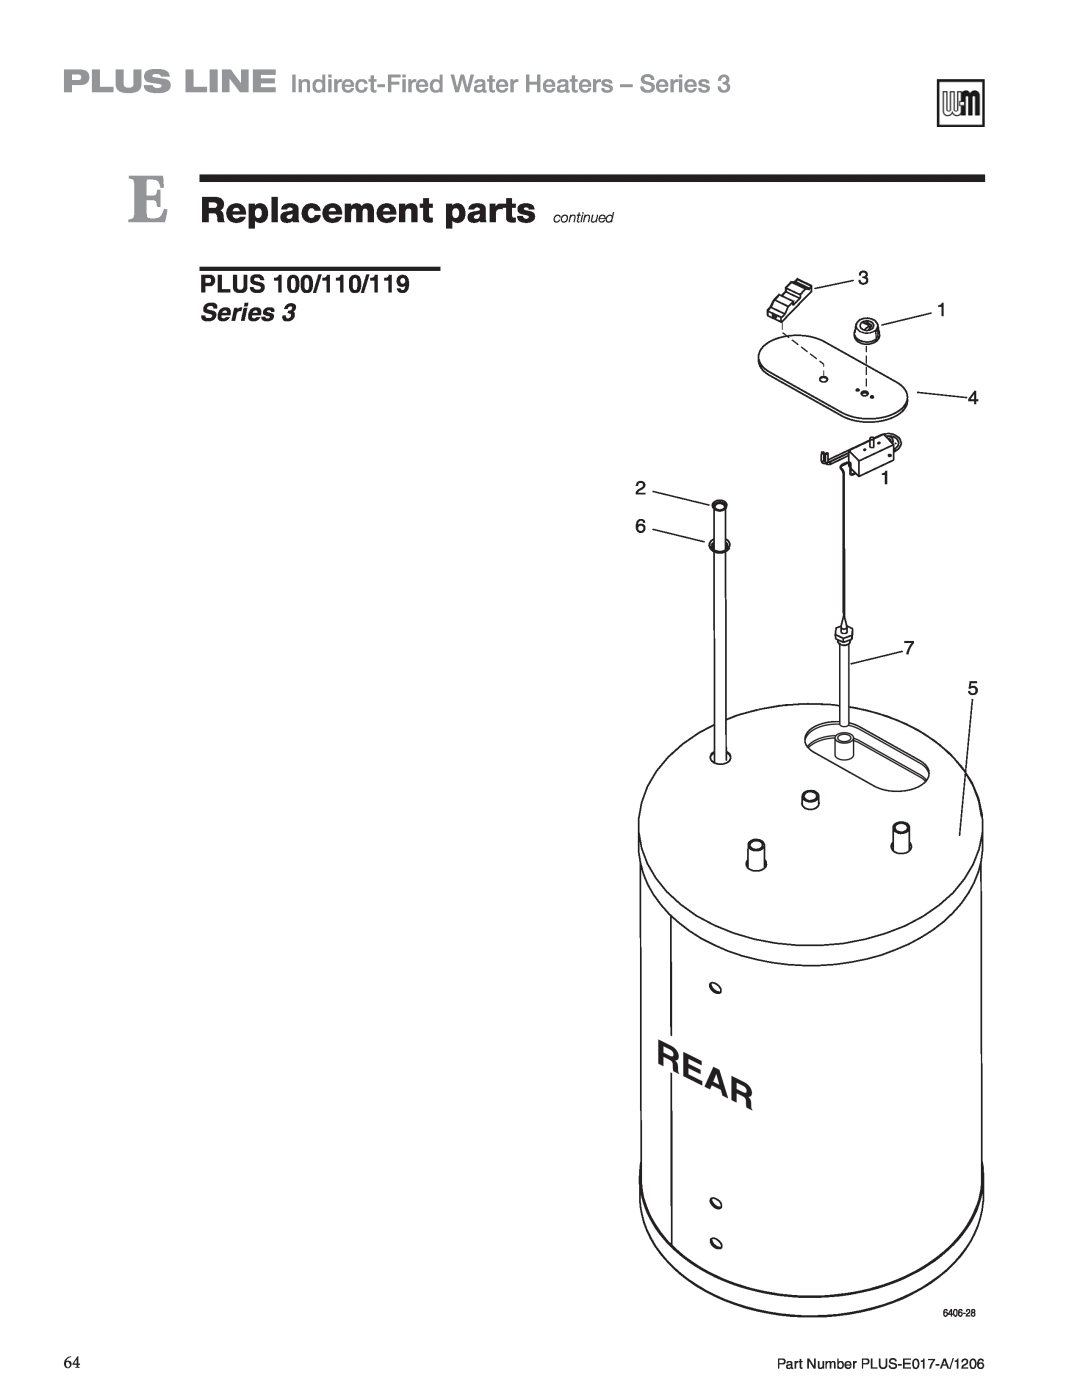 Weil-McLain PLUS-E017-A/1206 manual E Replacement parts continued, PLUS LINE Indirect-FiredWater Heaters - Series 